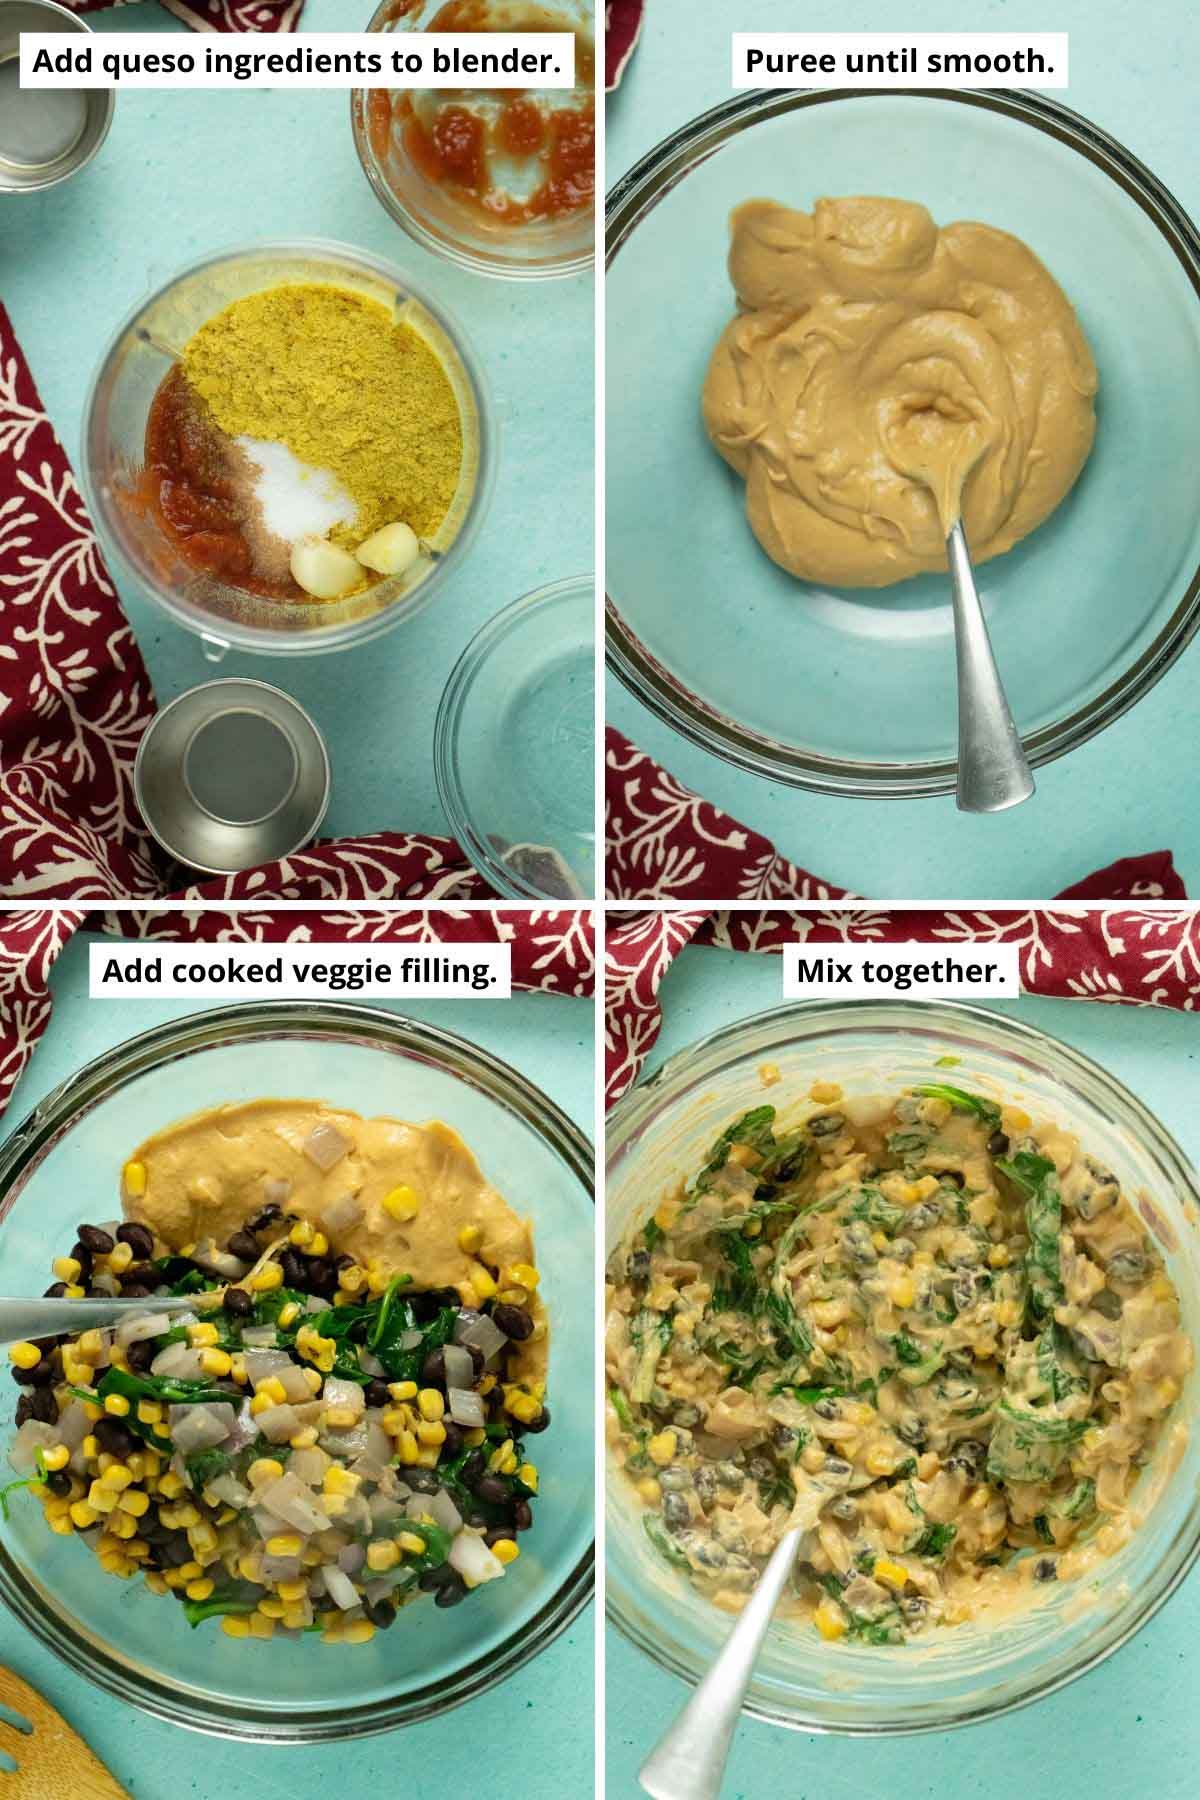 image collage showing the queso ingredients in the blender, then in a bowl, then with the veggies, and all mixed together